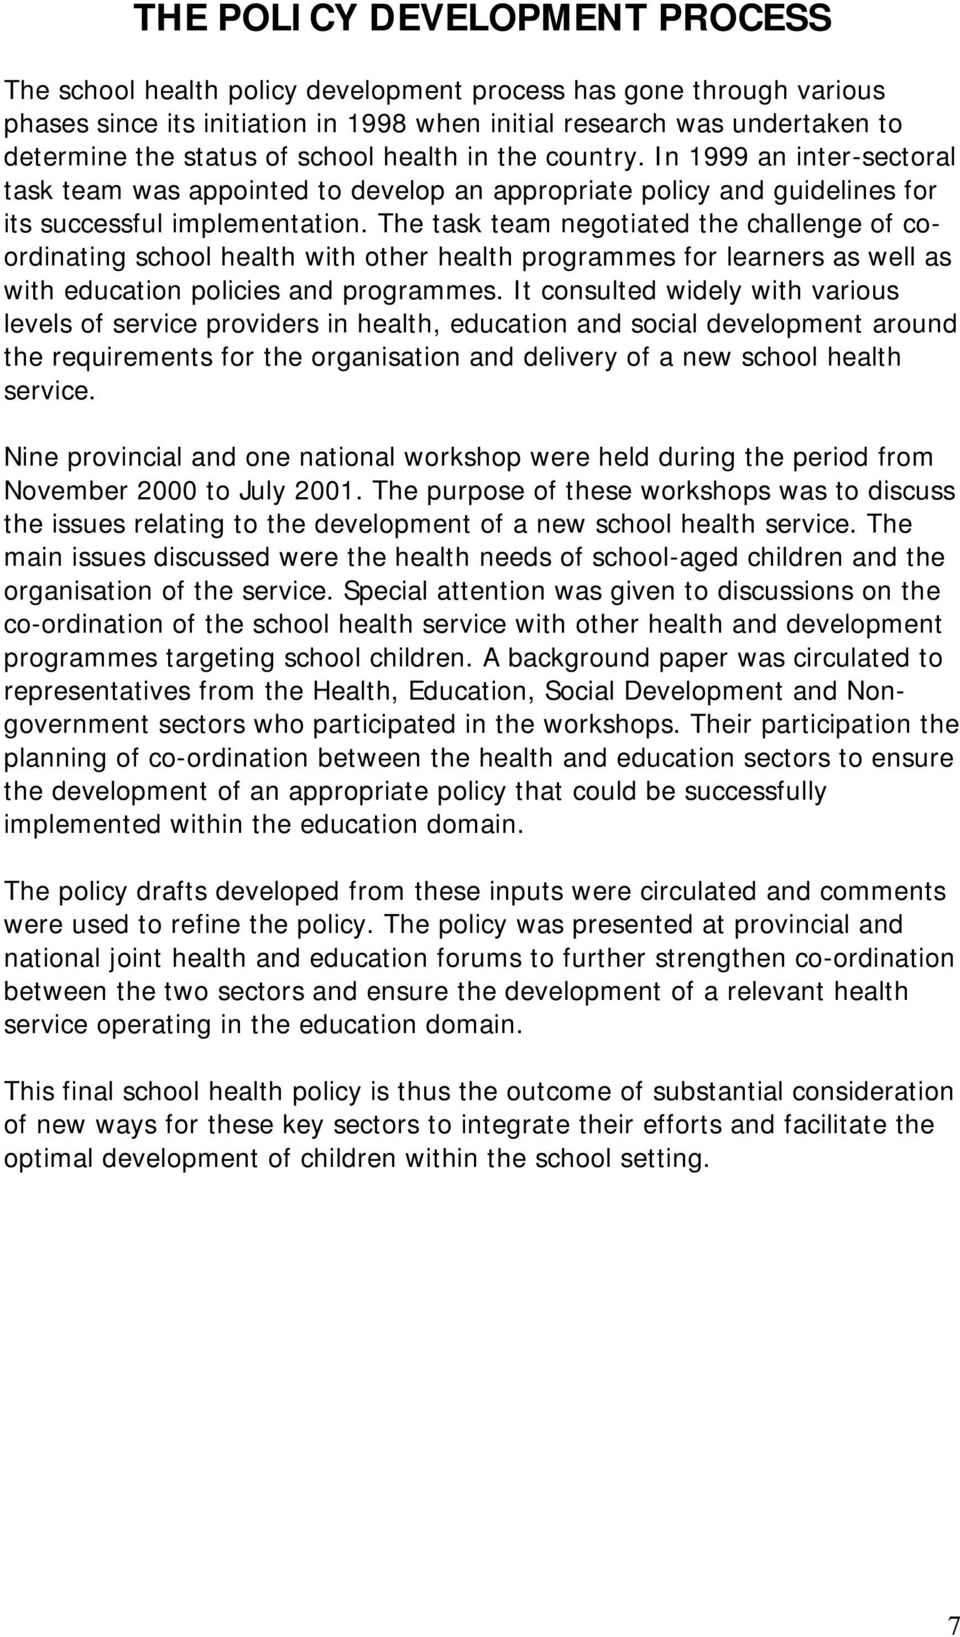 The task team negotiated the challenge of coordinating school health with other health programmes for learners as well as with education policies and programmes.